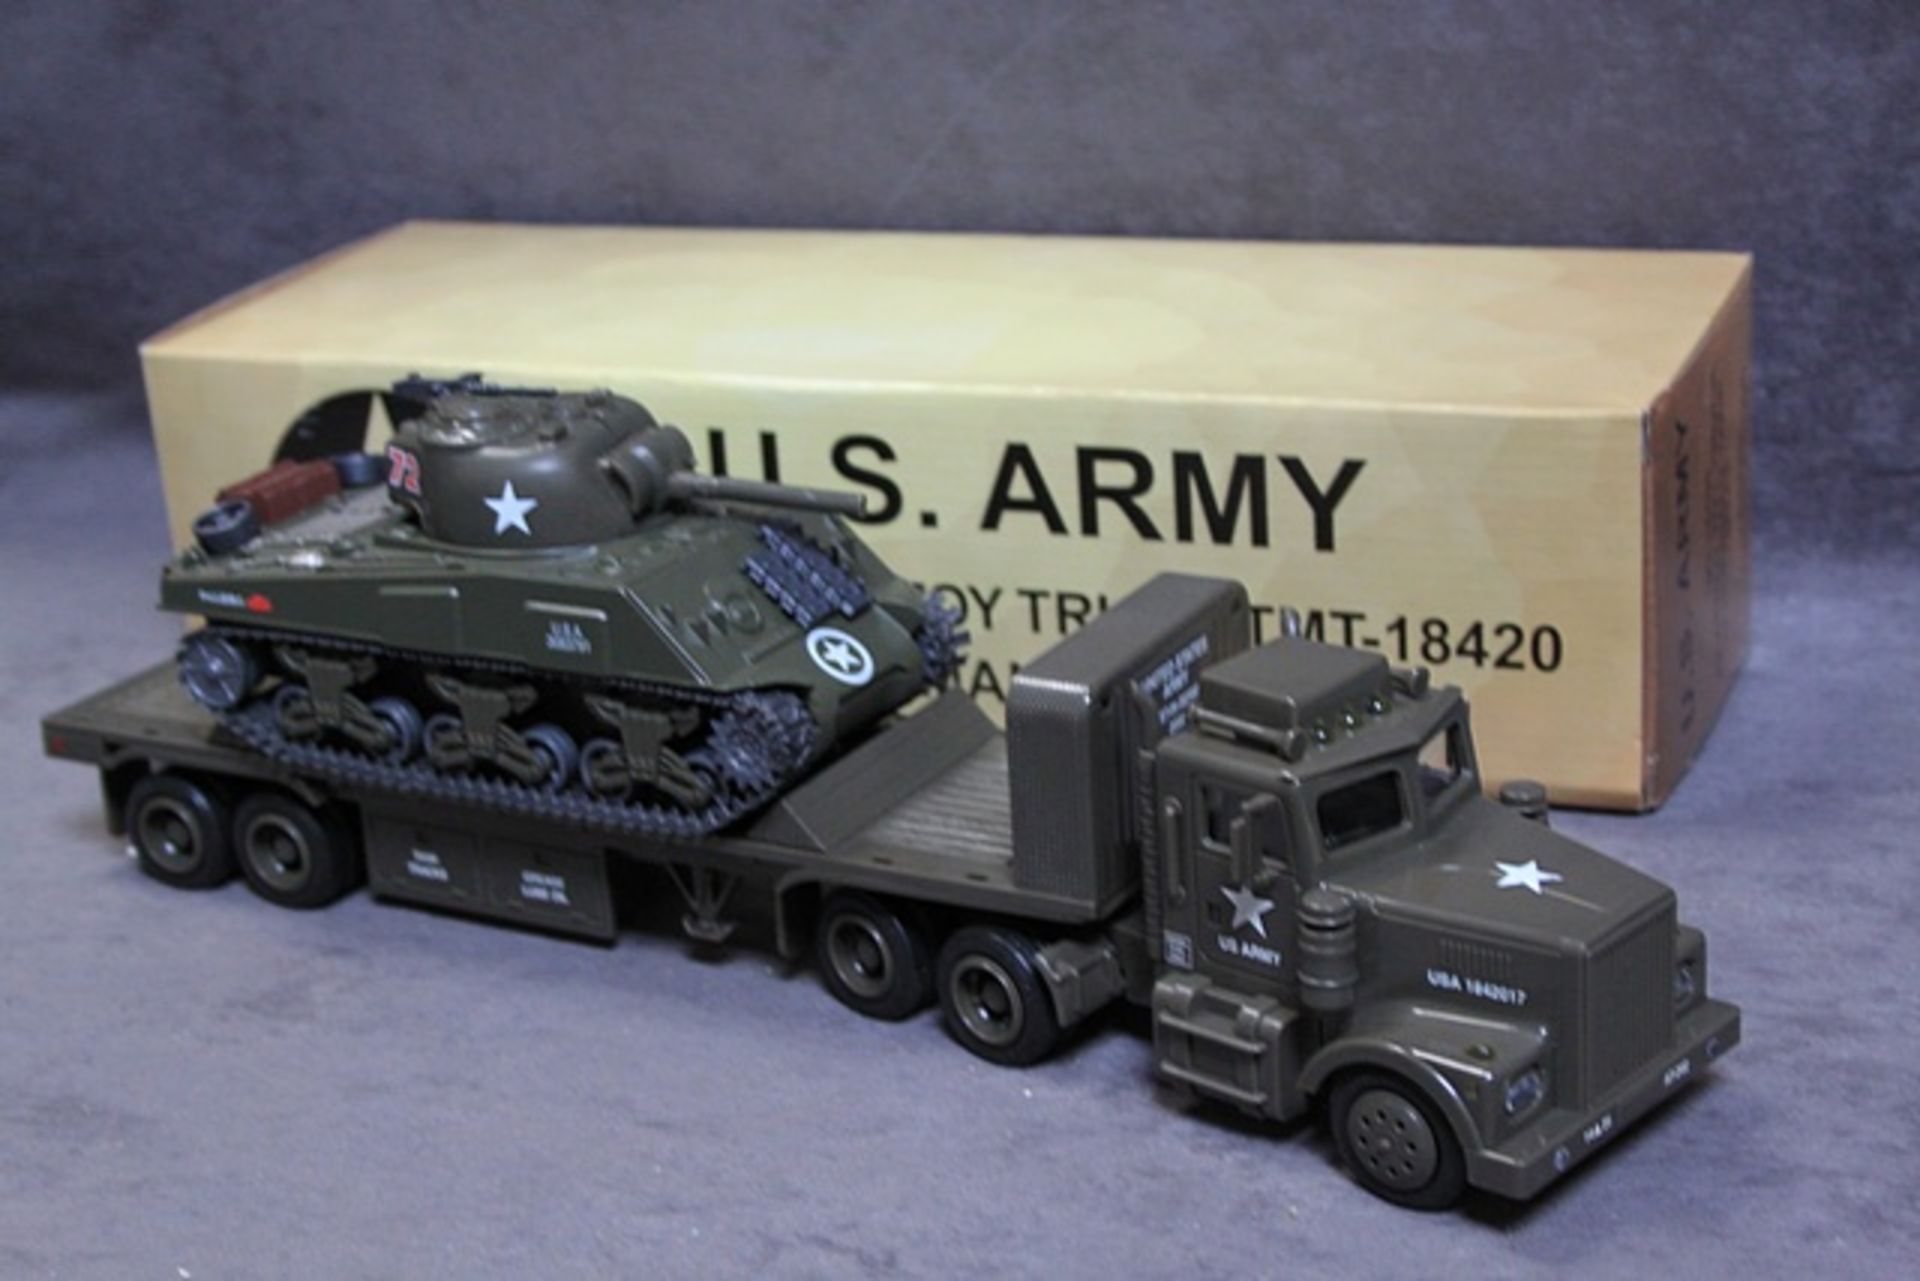 TMT Taylor Trucks (USA) Military U.S. Army Sherman Tank M4a3 With Transport Truck Taylor Tmt-18420 - Image 2 of 4